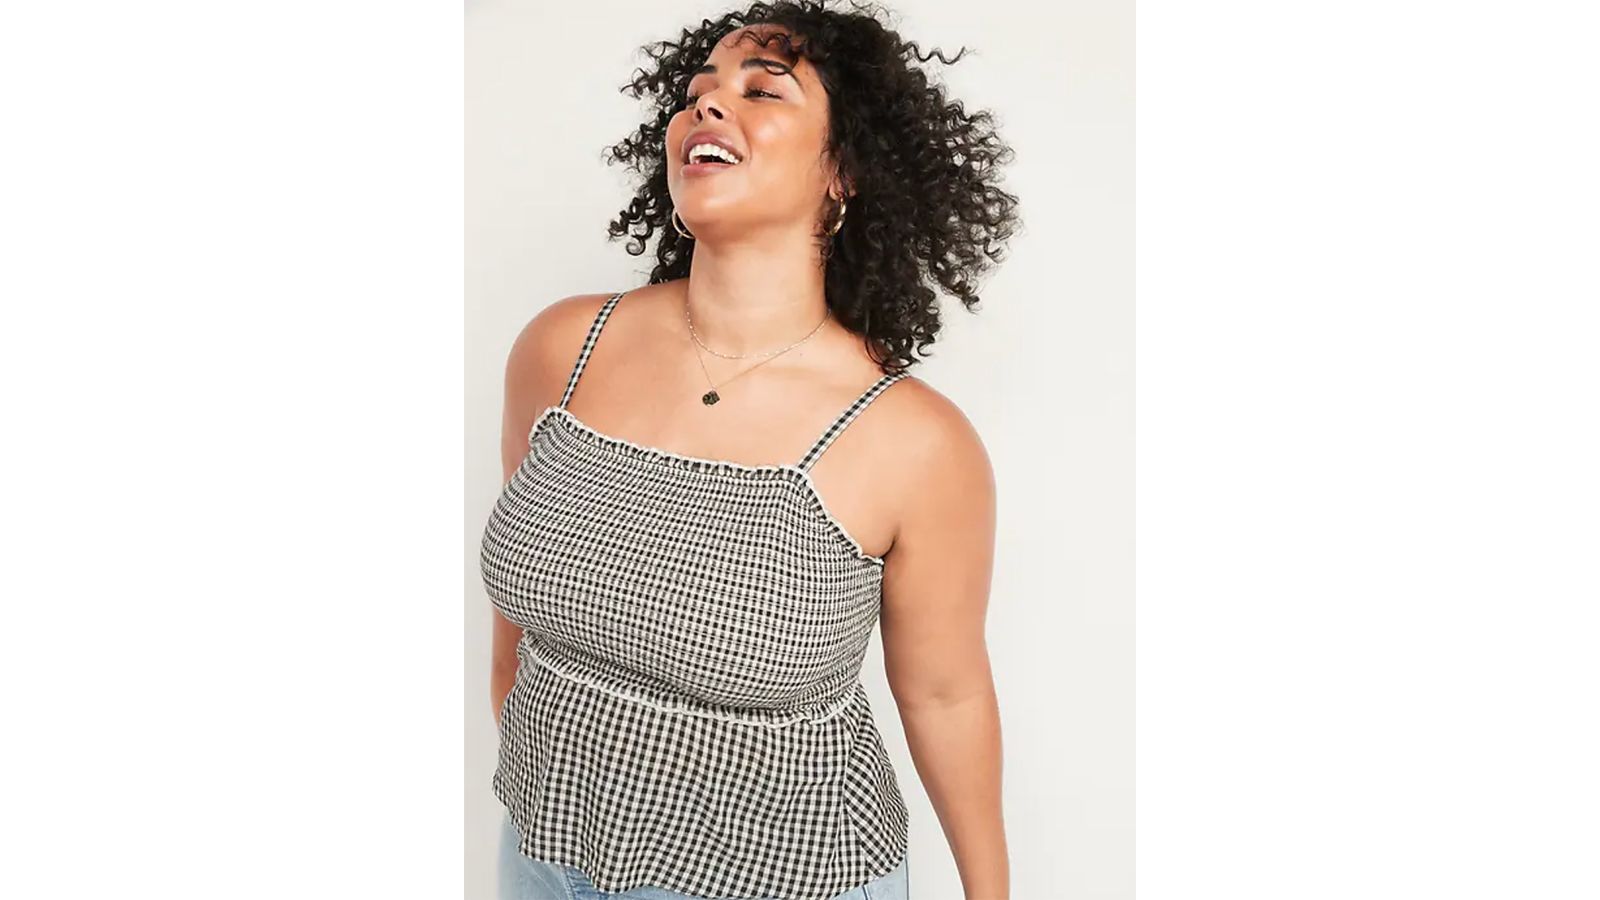 Navy revamps plus sized with Bodequality | CNN Underscored